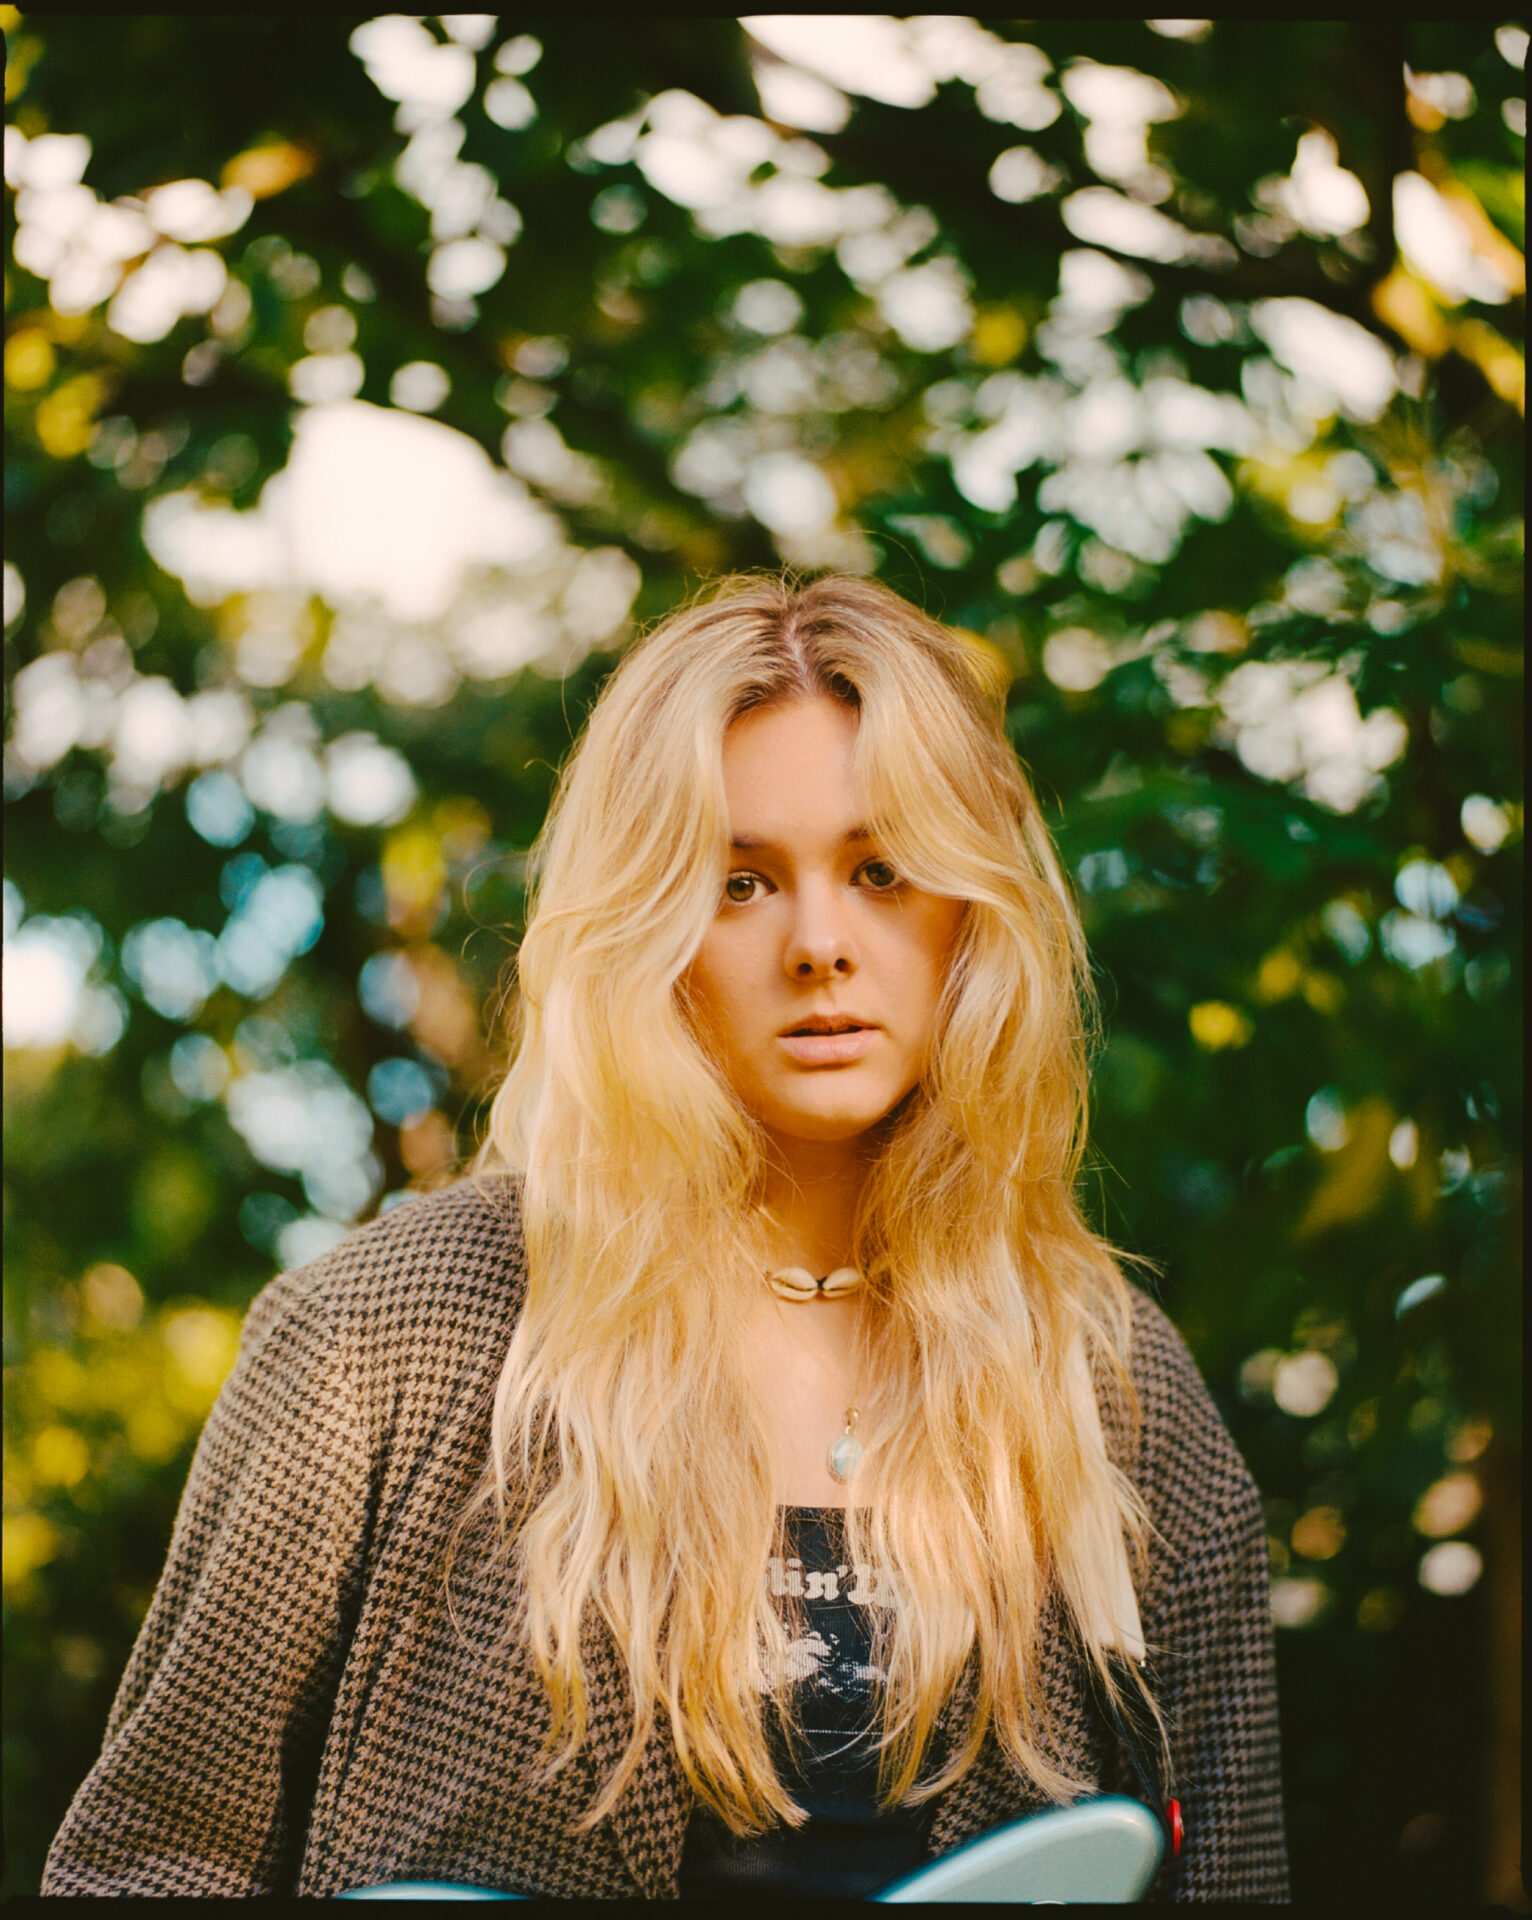 NEWS: Cornish producer Bailey Tomkinson releases her latest countryside single 'Graceland'